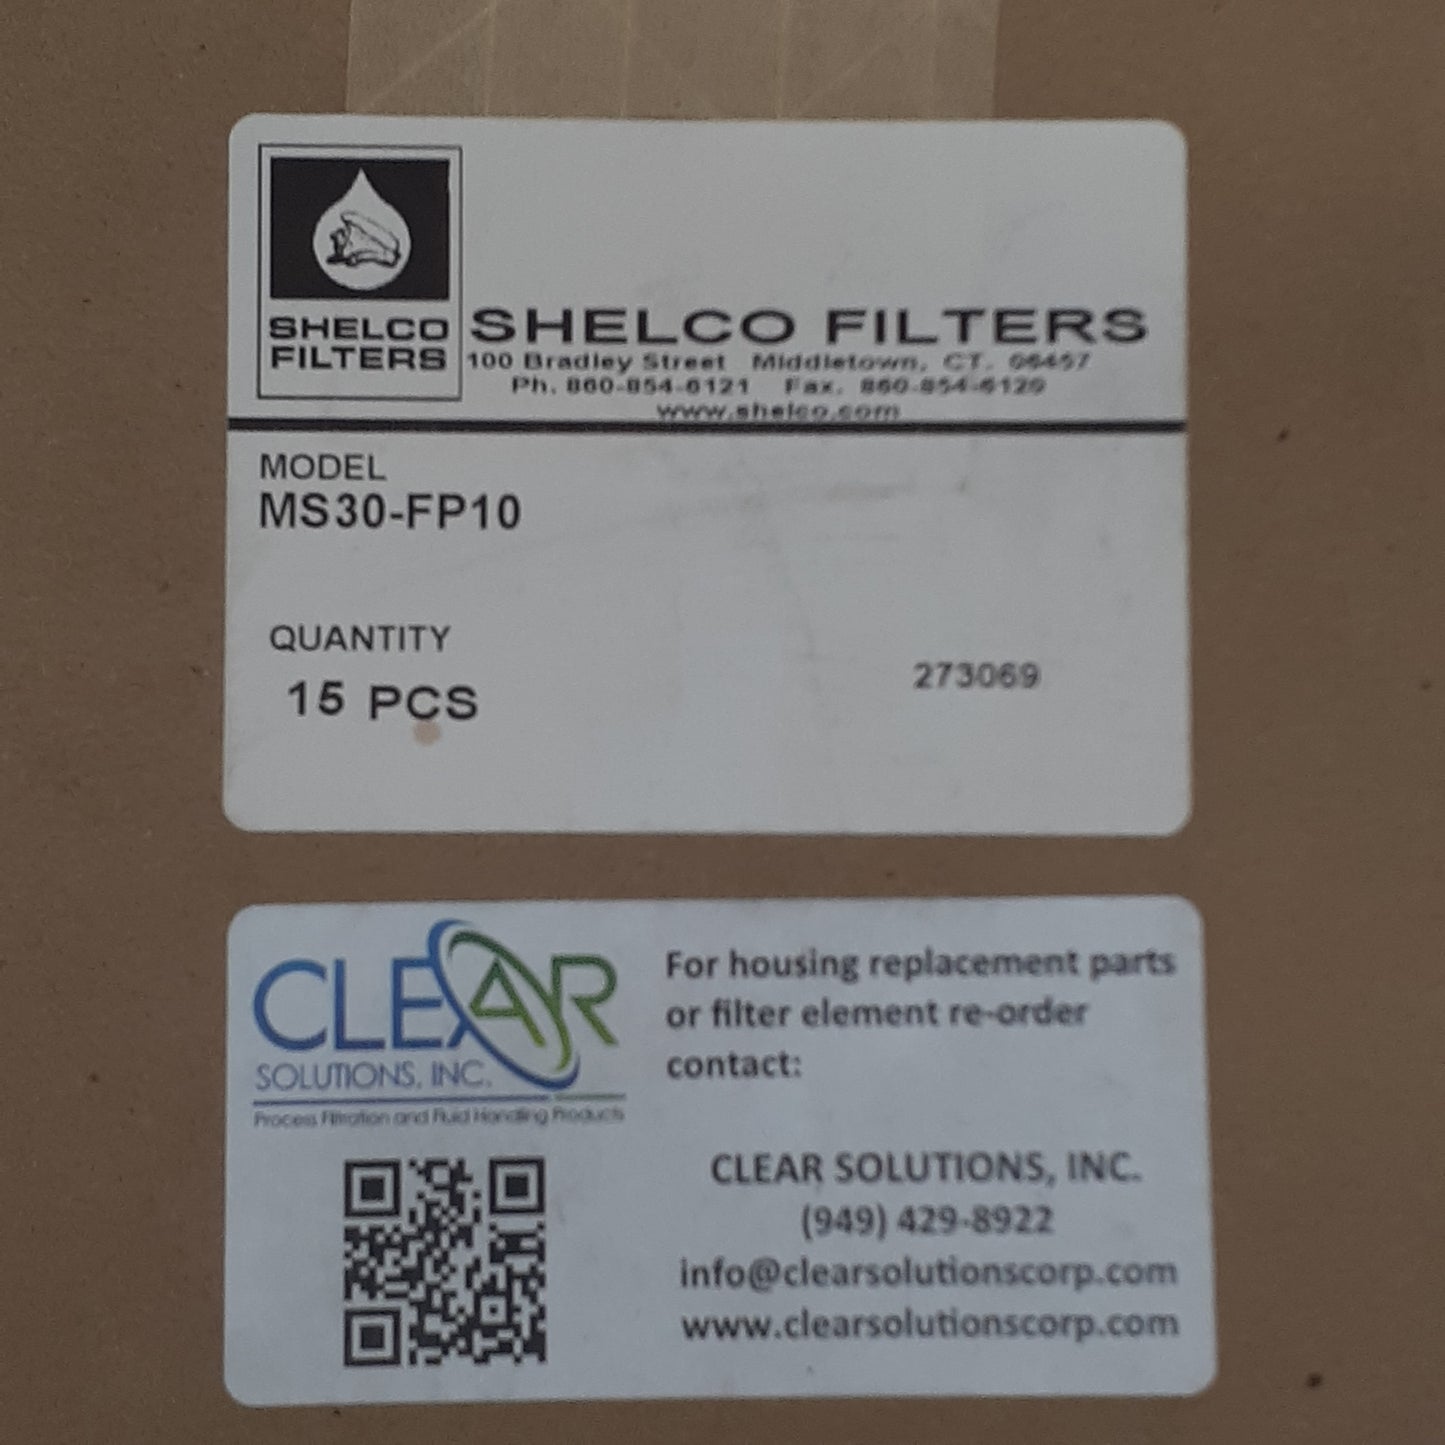 SHELCO Filters Box of 15 String Wound Polypropylene Micron Filters 30" MS30-FP10 (New)